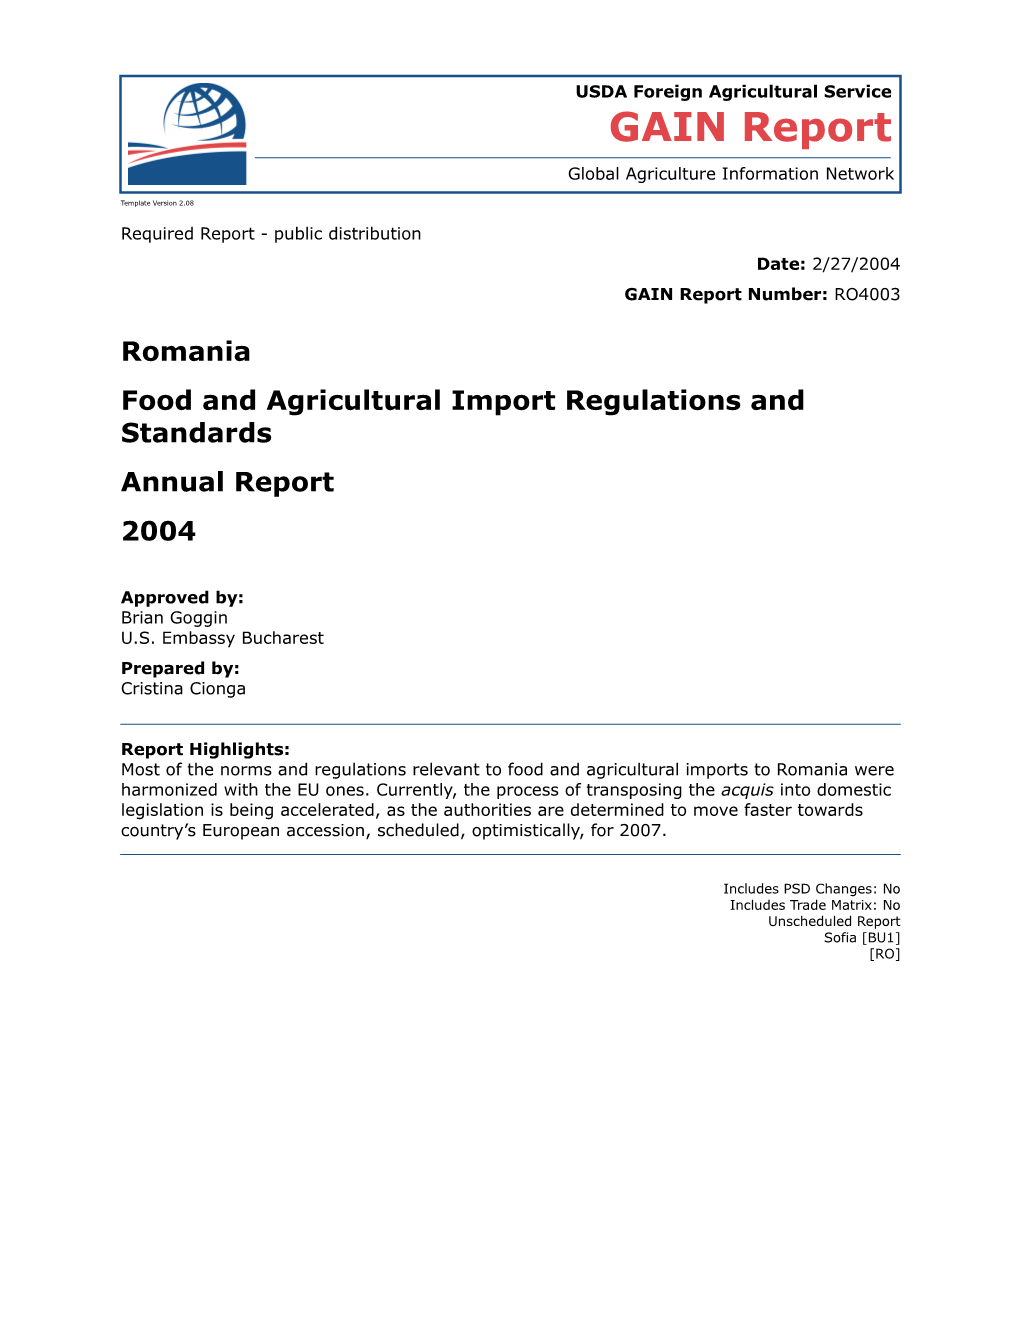 Food and Agricultural Import Regulations and Standards s17